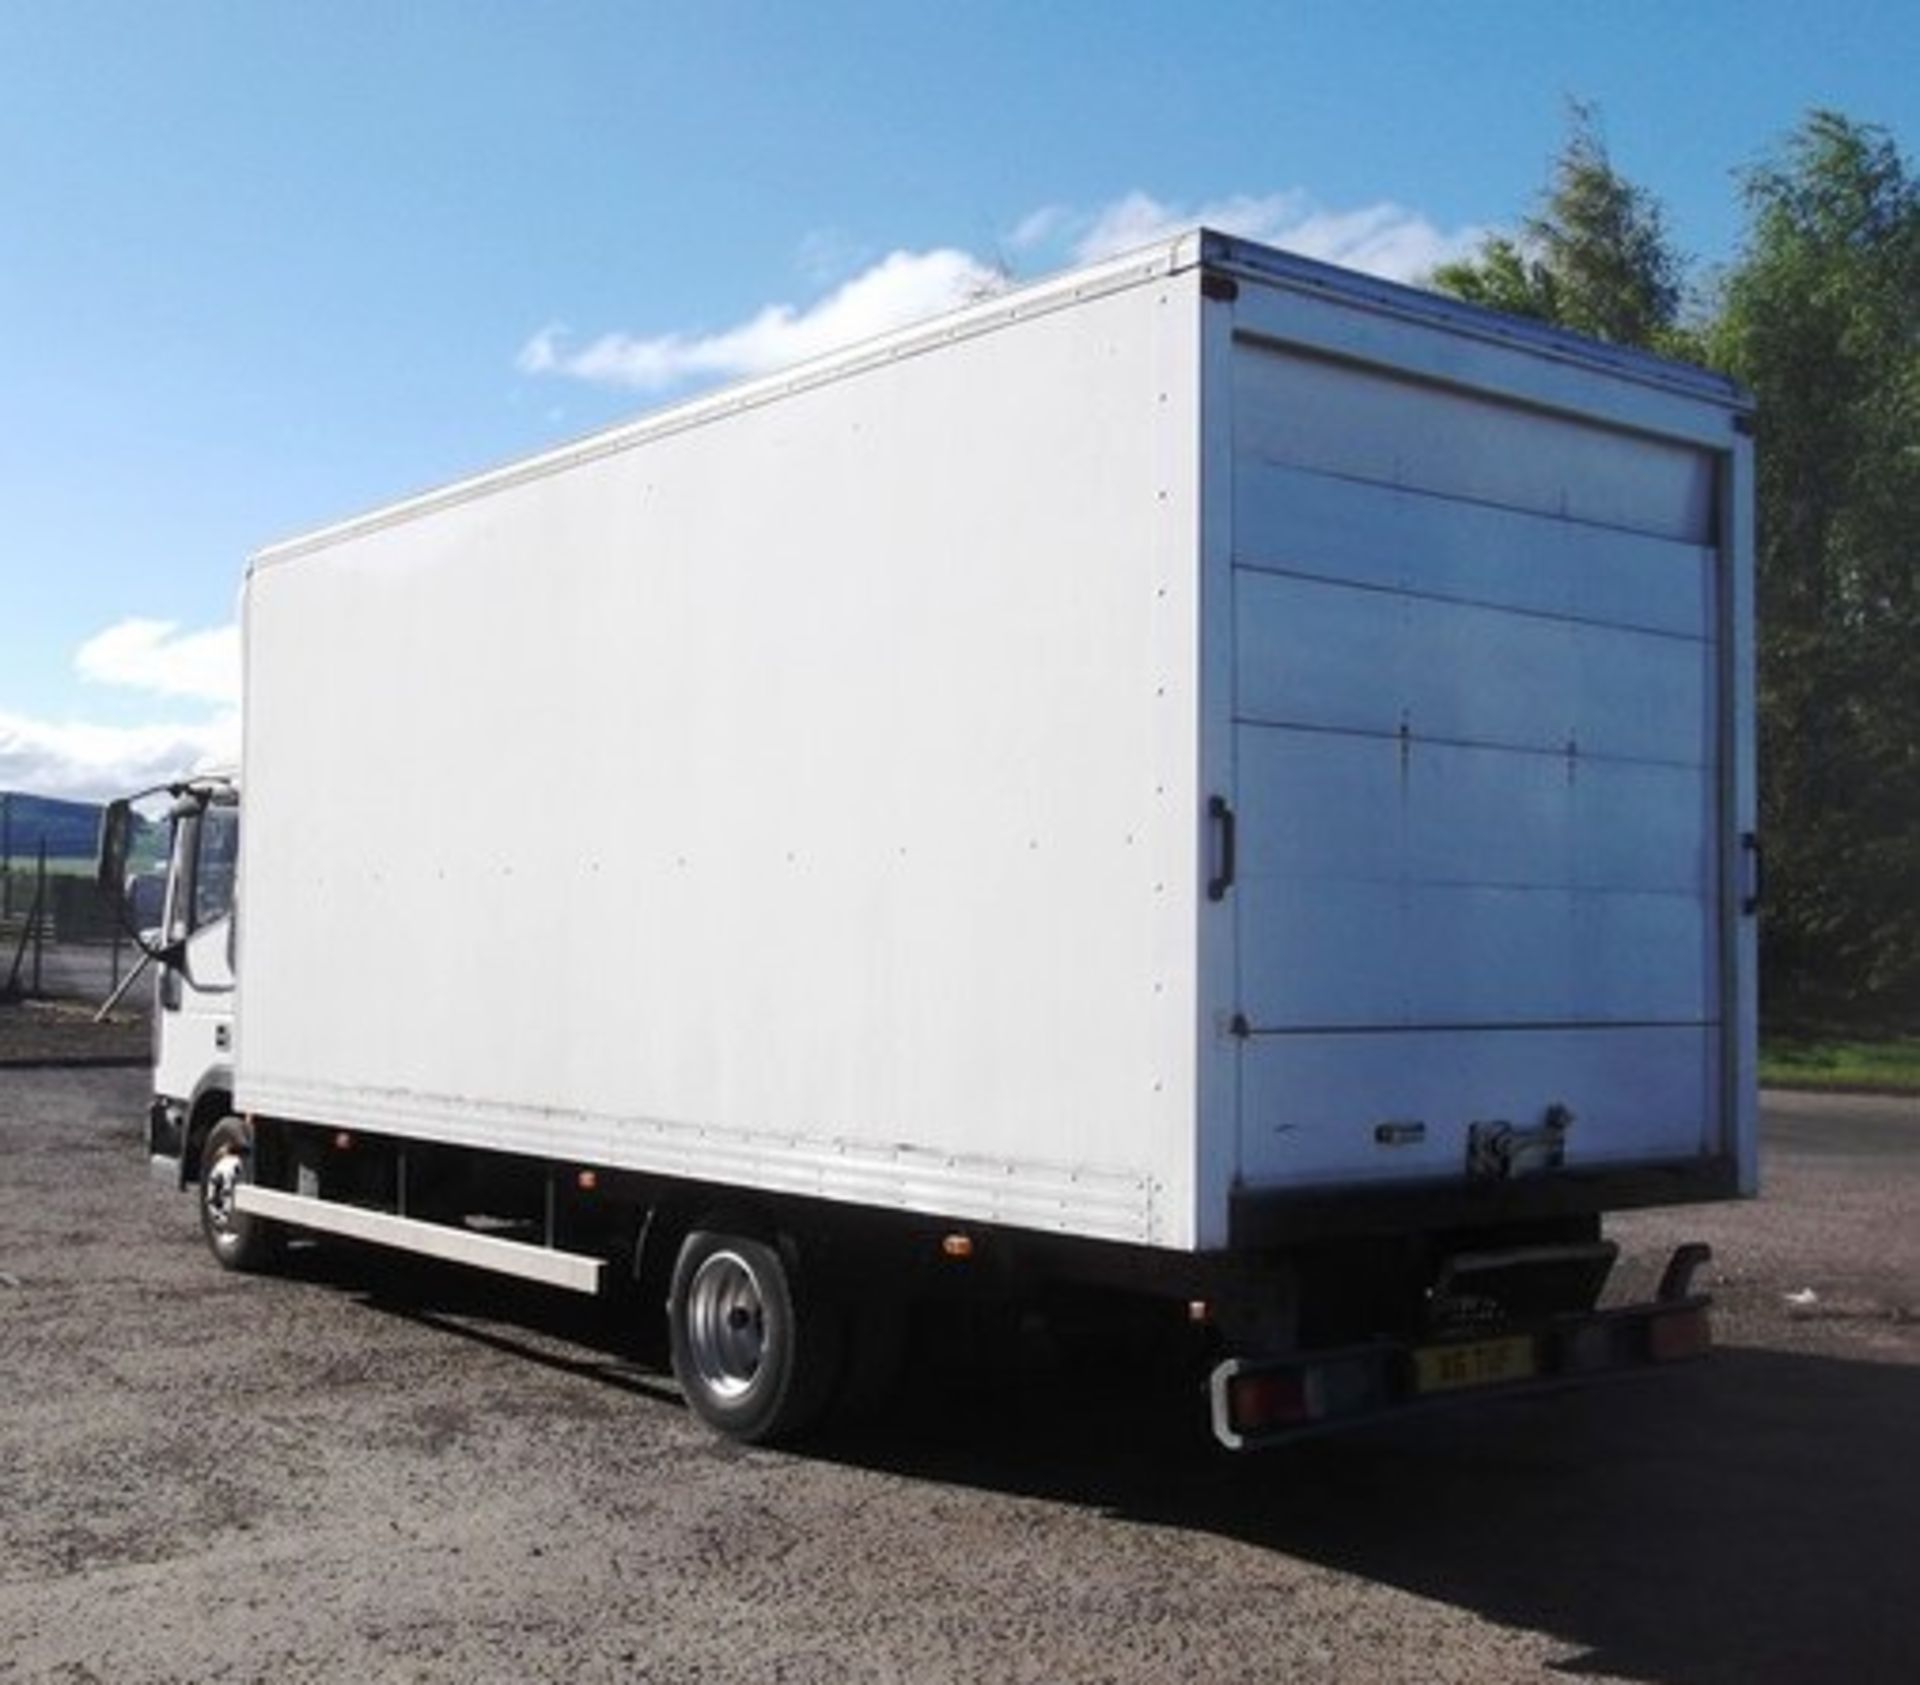 IVECO-FORD CARGO TECTOR - 3920cc
Body: 2 Dr Van
Color: White
First Reg: 05/03/2004
Doors: 2
MOT: - Image 8 of 10